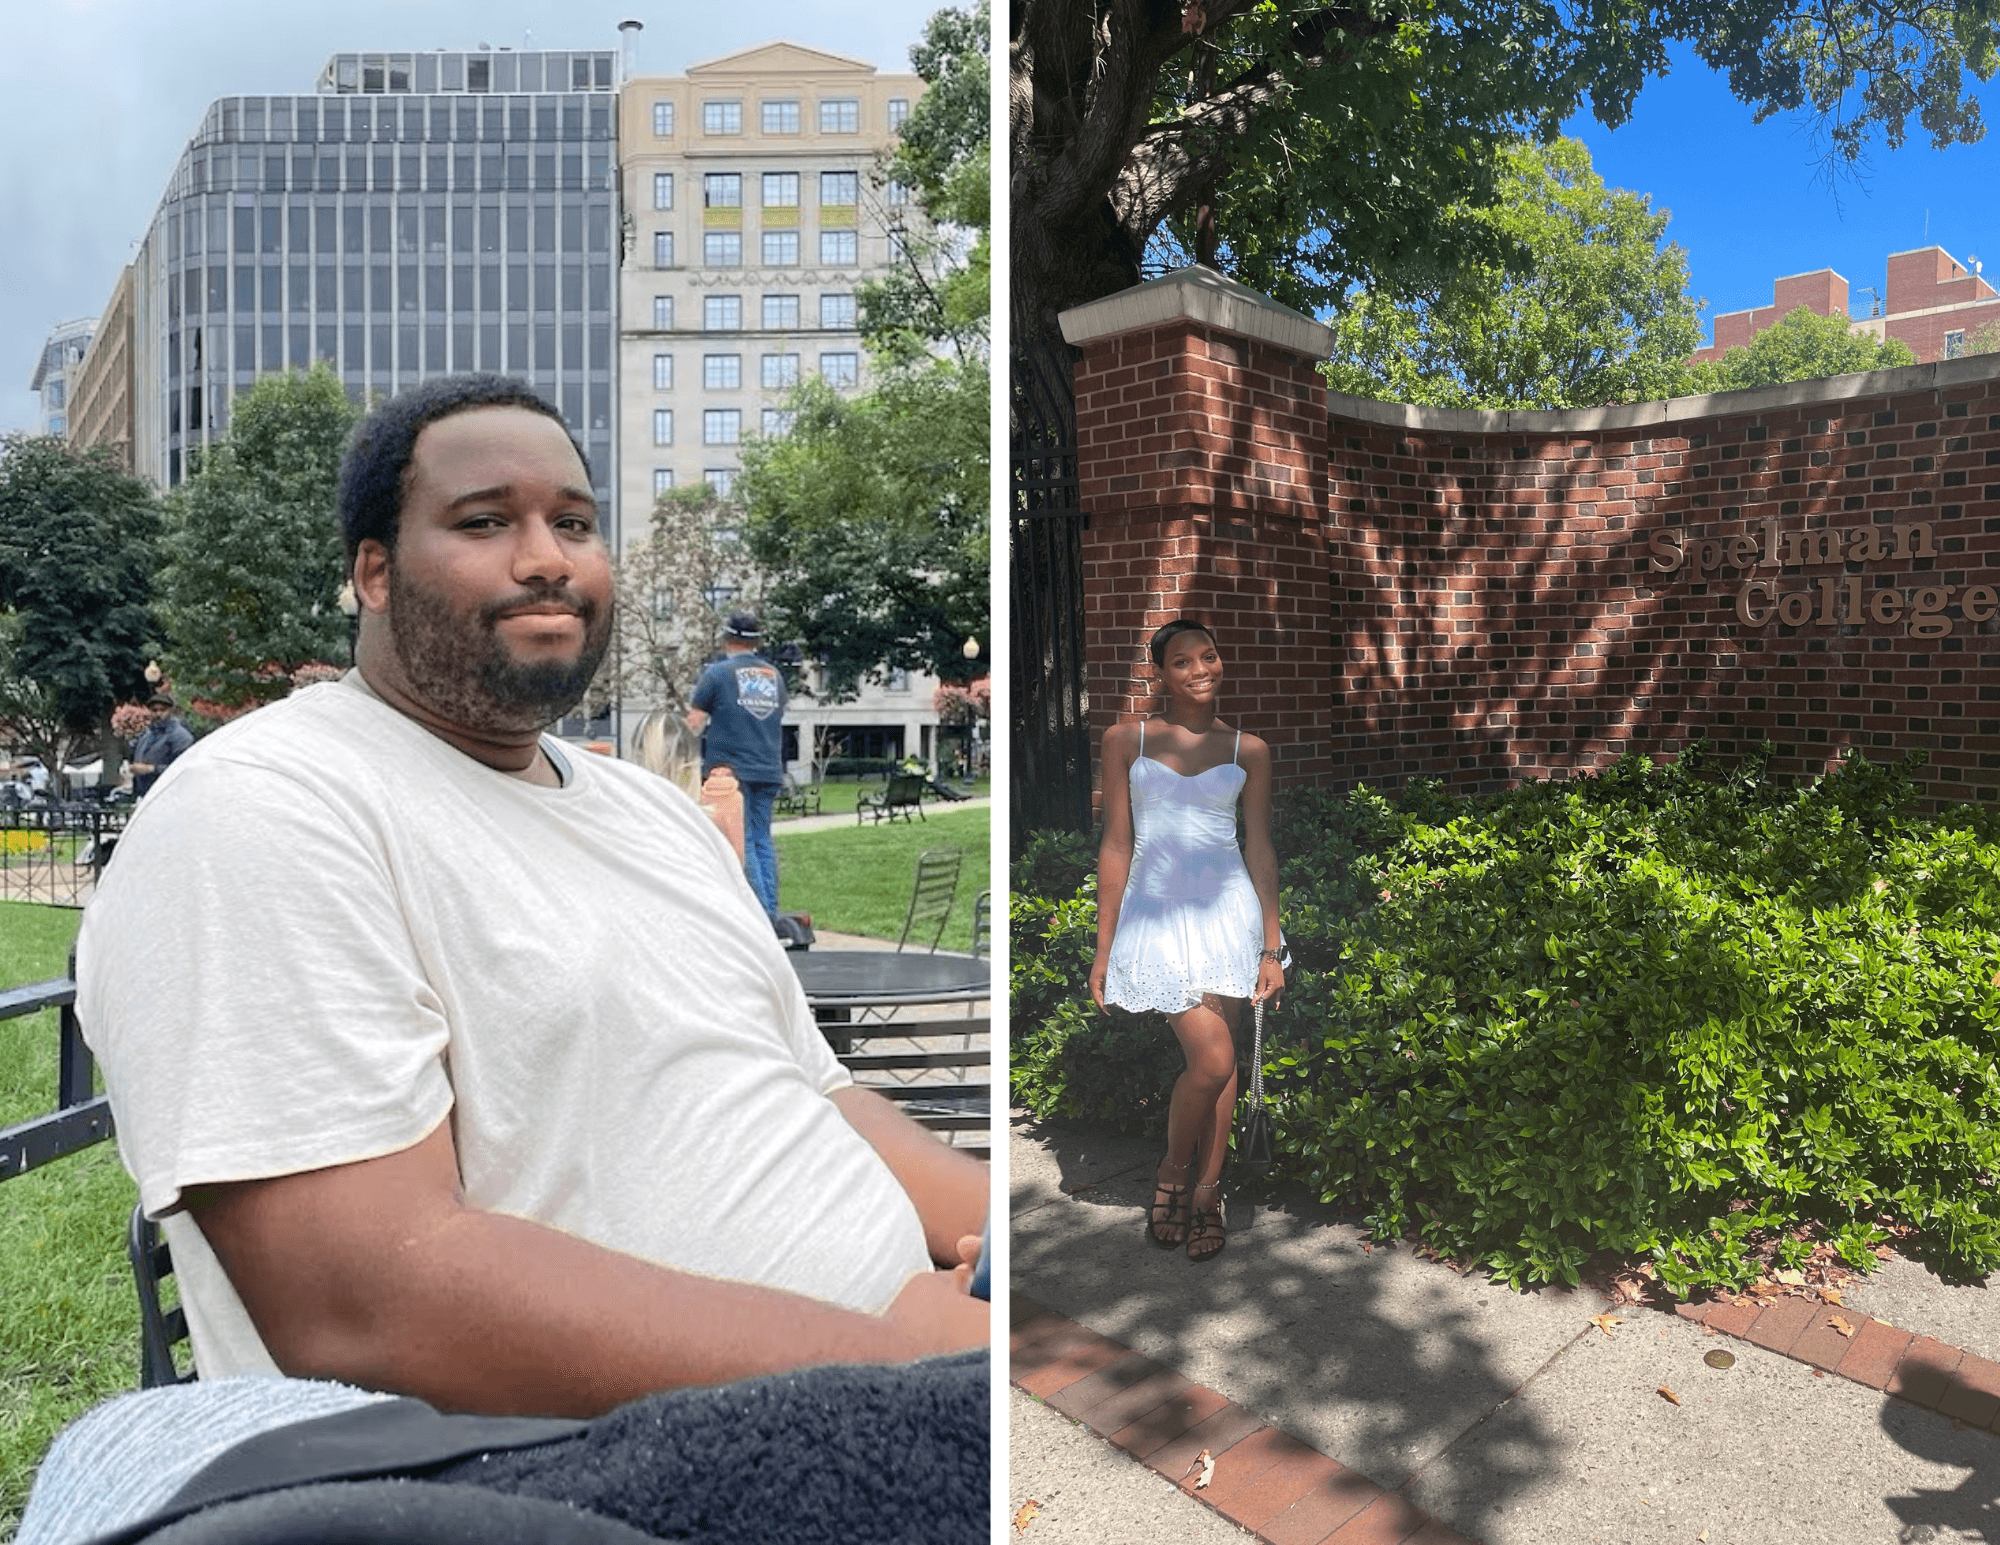 Two photos of a young woman standing in front of a brick wall that says Spelman College and a young man sitting on a park bench